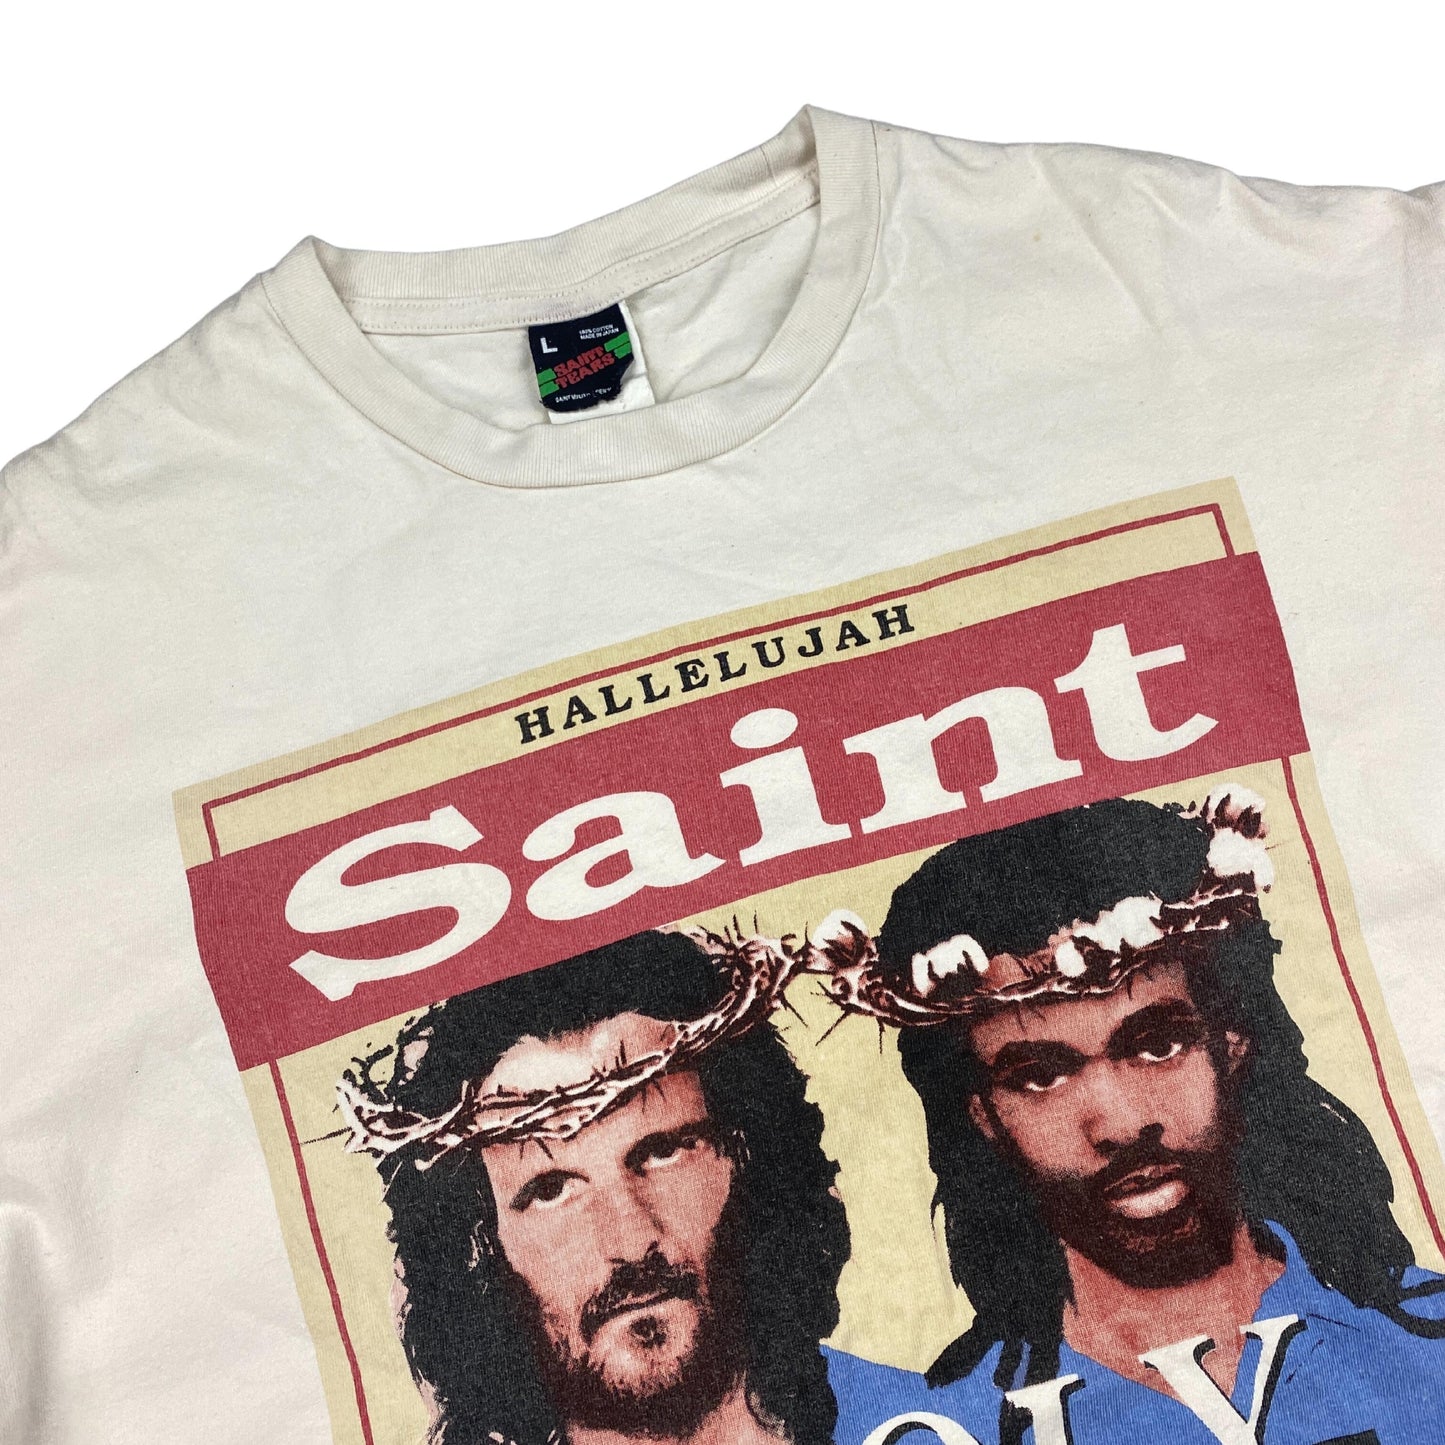 SAINT MXXXXXX HOLY STATE TEE (L) - Known Source